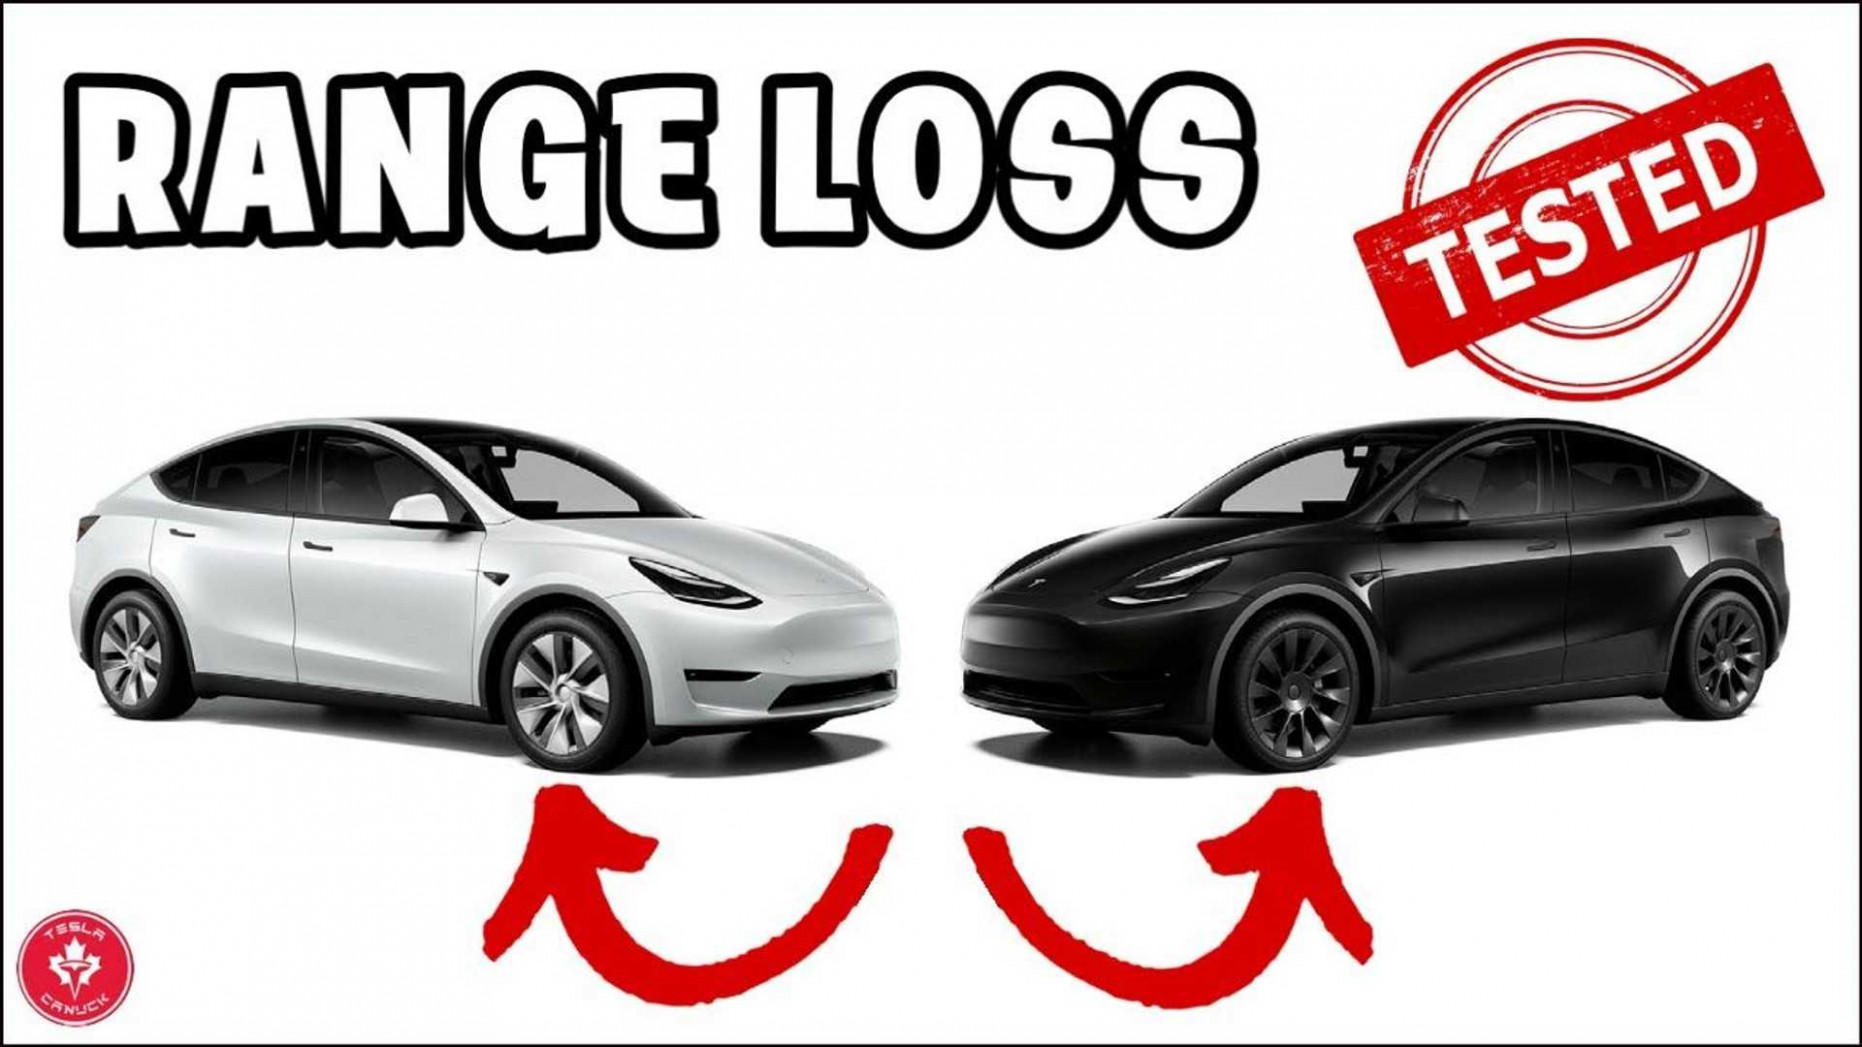 Tesla Model Y Real World Range Loss With 4 Inch Wheels Tesla Model Y 19 Vs 20 Inch Wheels